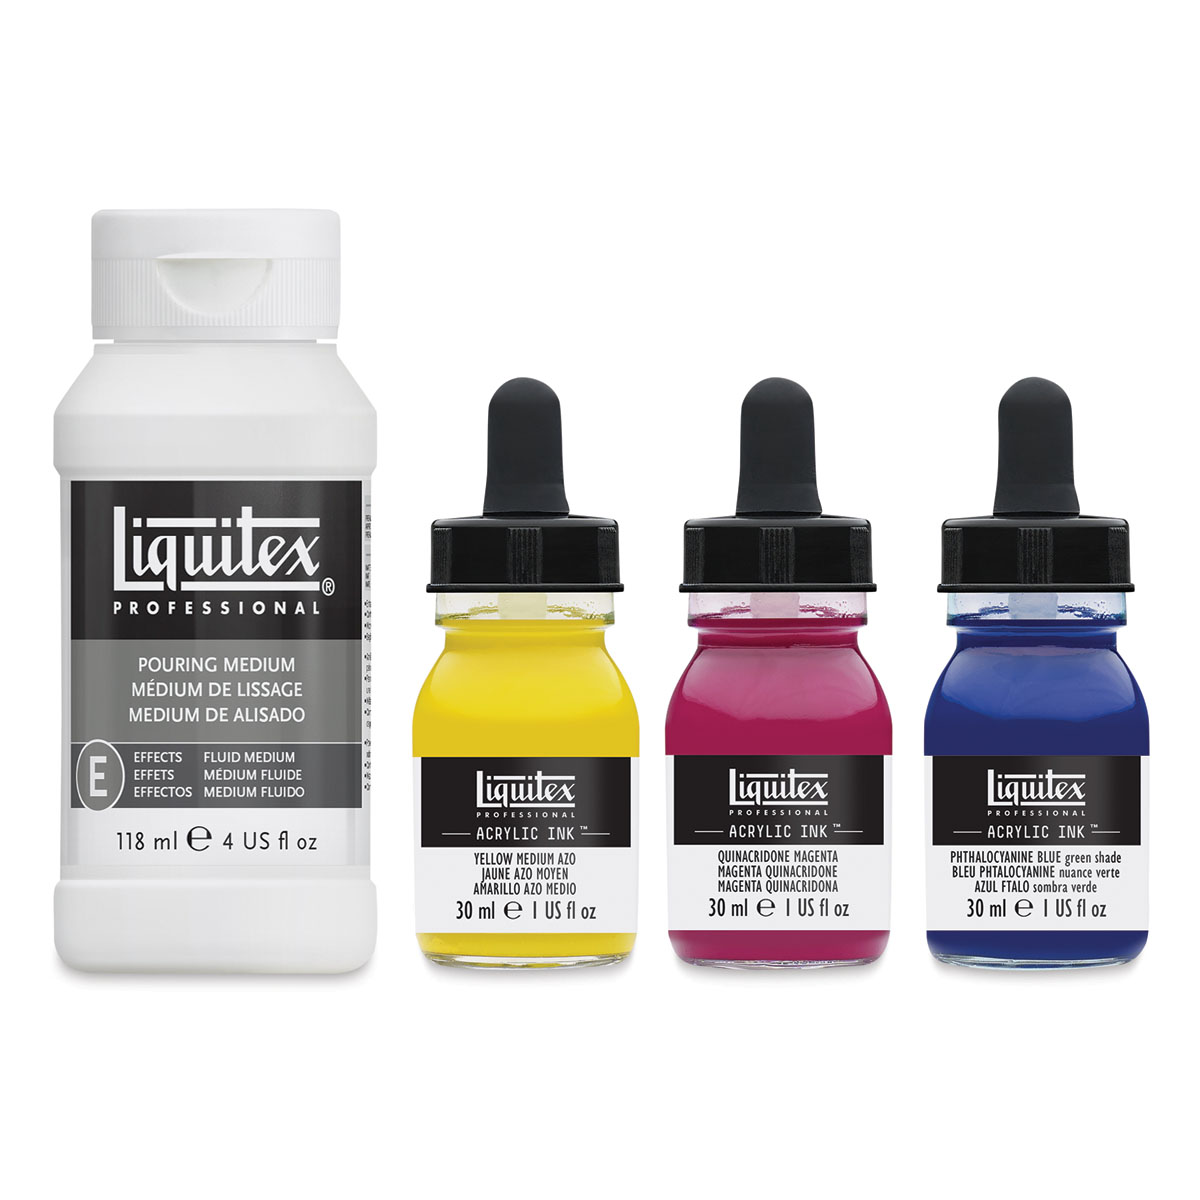 Art Shed Online - Have you tried Liquitex Acrylic Inks? Liquitex